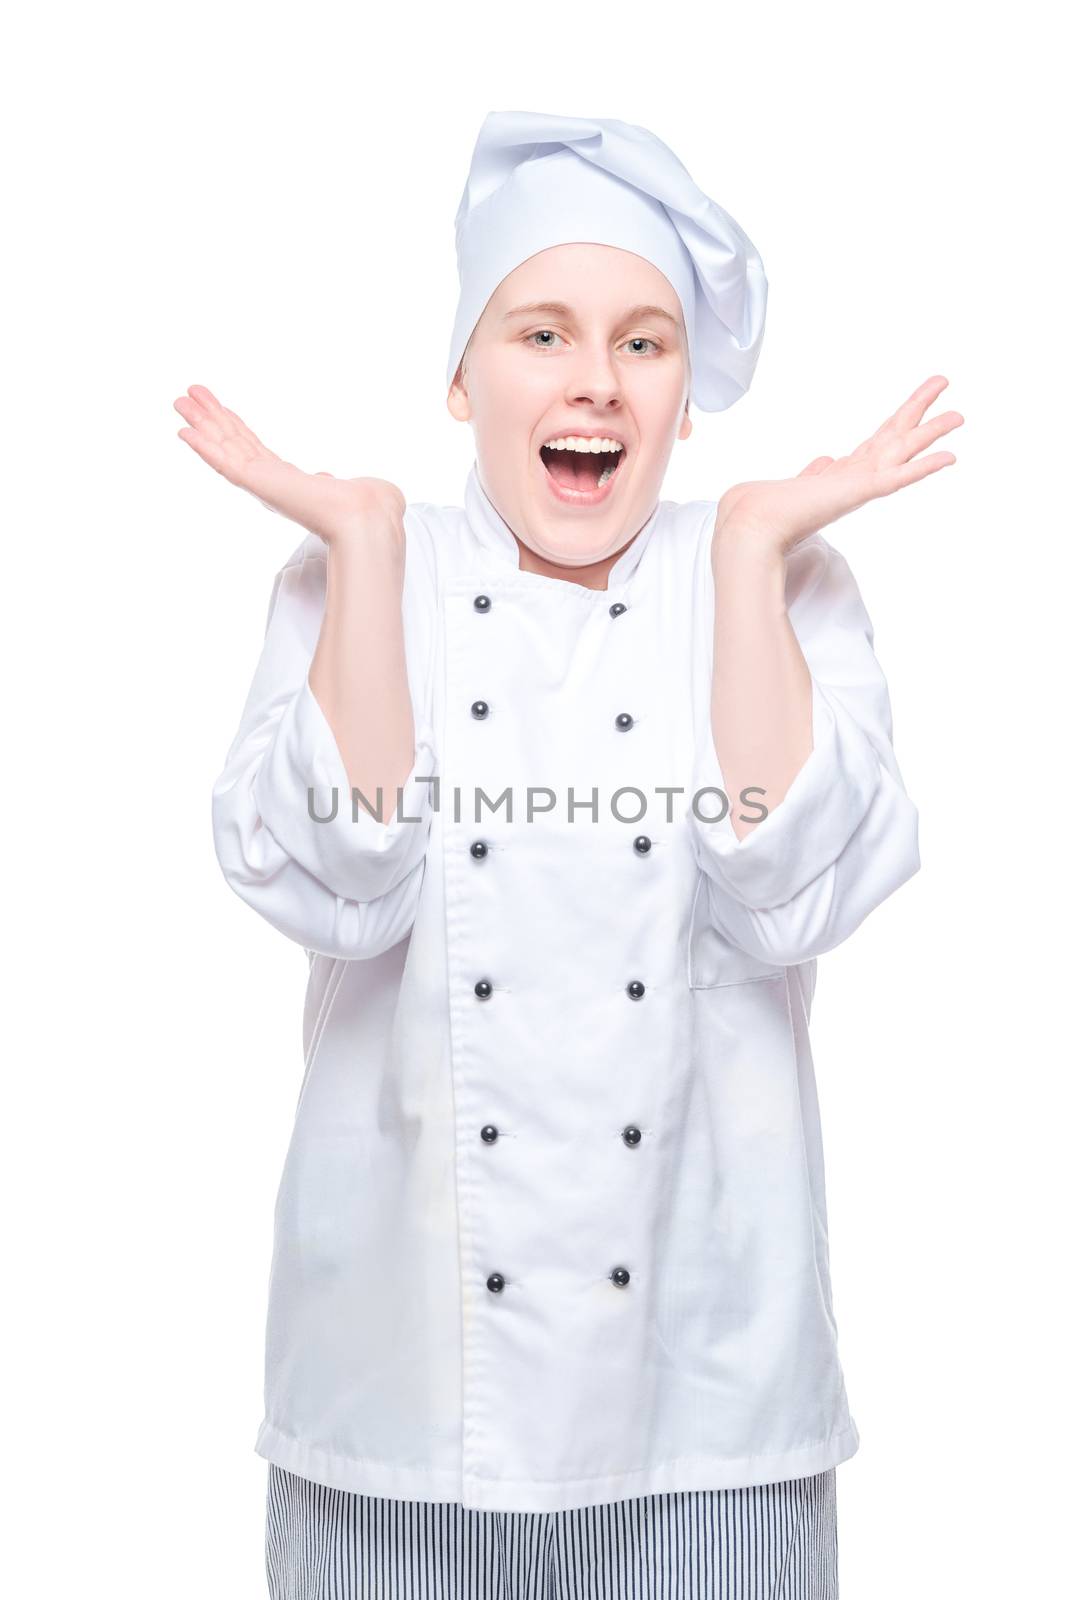 emotional chef in suit rejoices in victory, portrait on white ba by kosmsos111